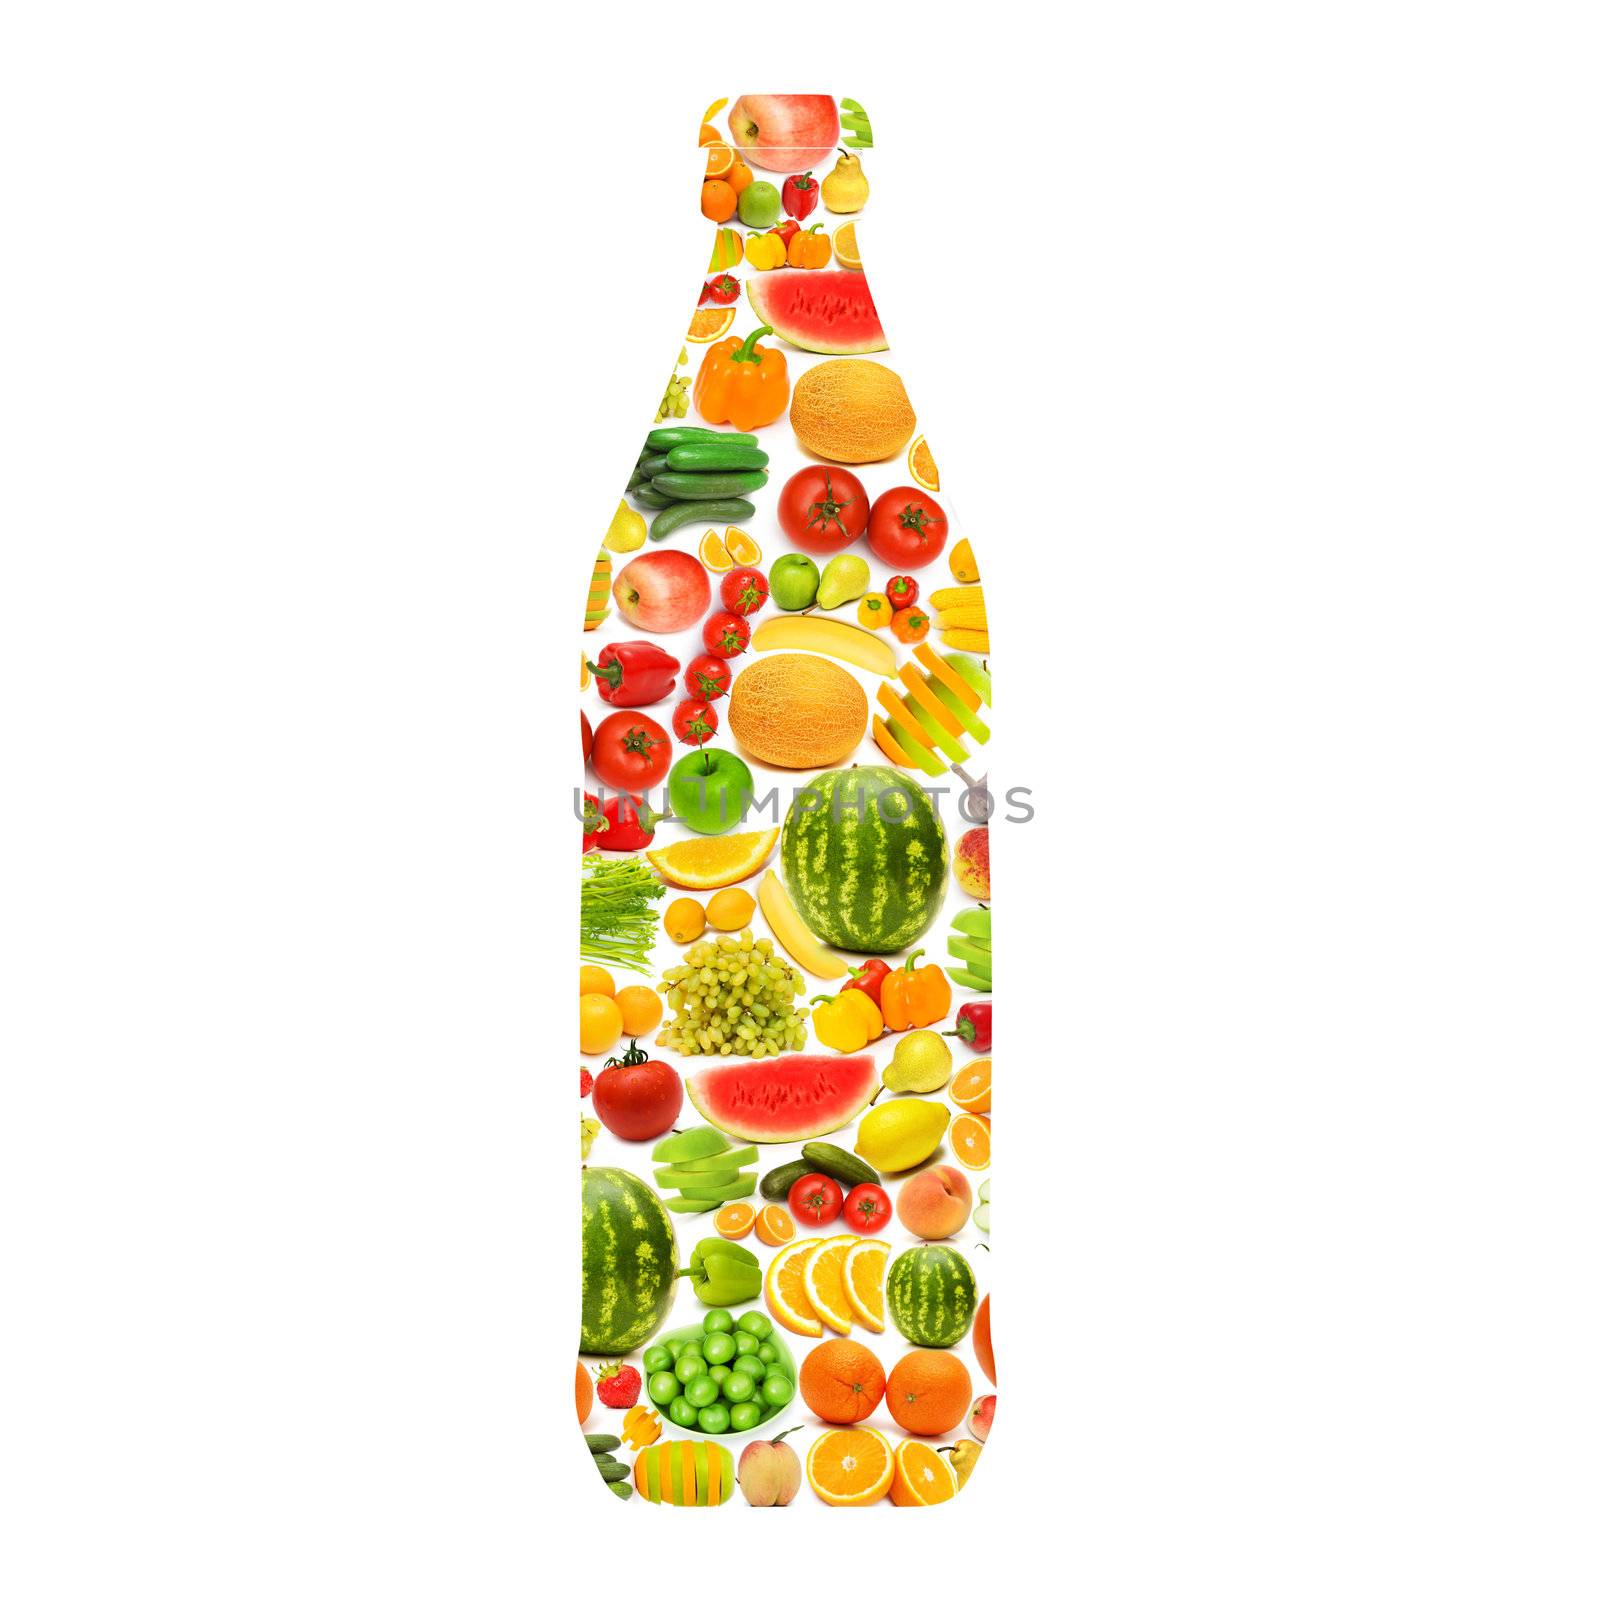 Silhoette made from various fruits and vegetables